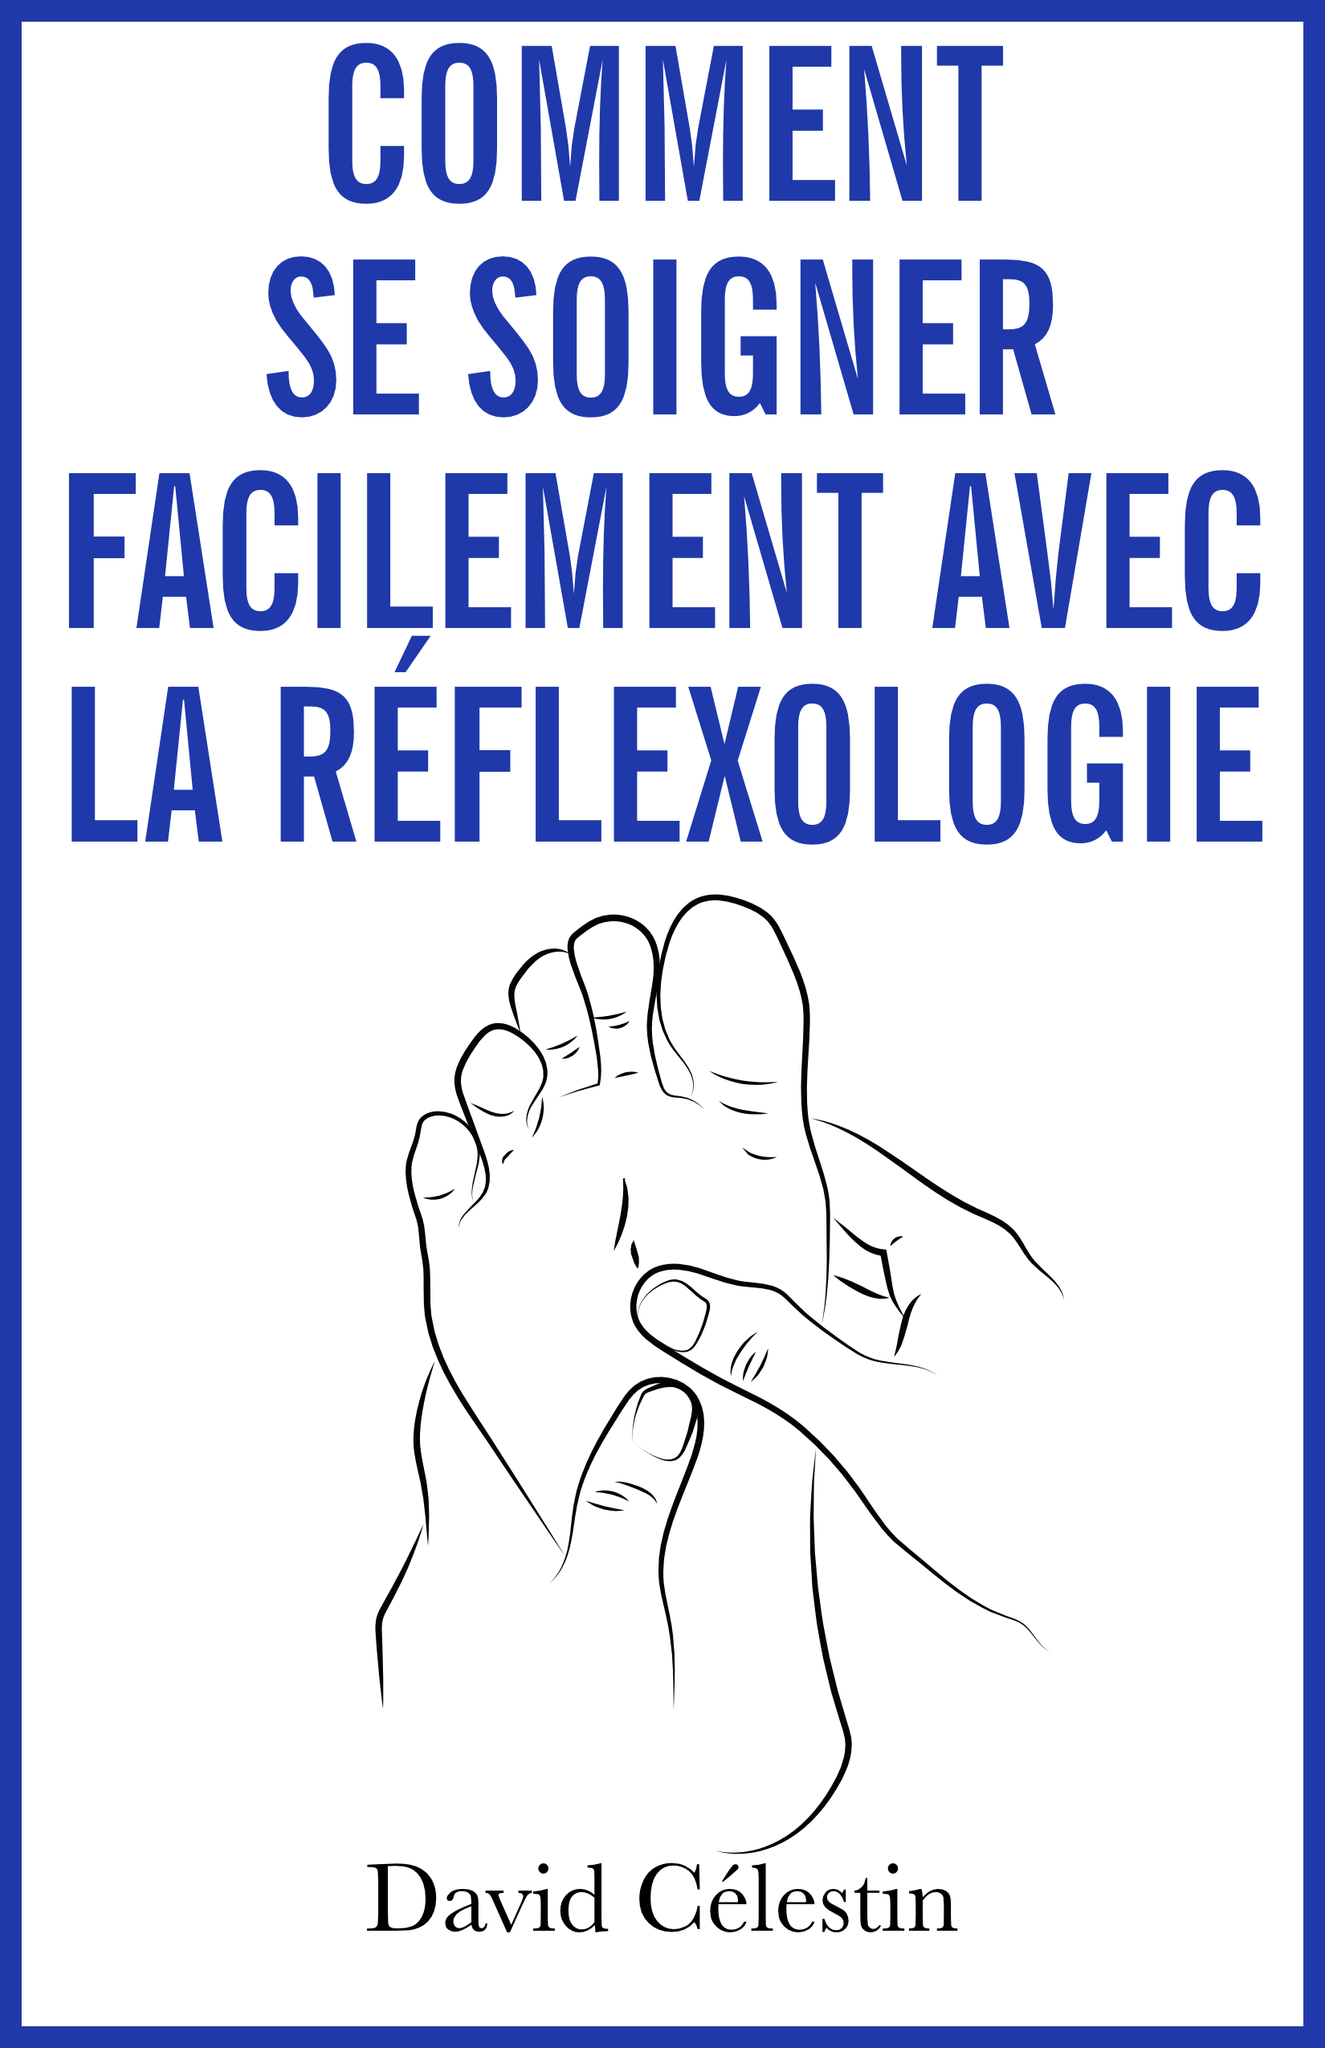 How to heal yourself easily with reflexology - ebook